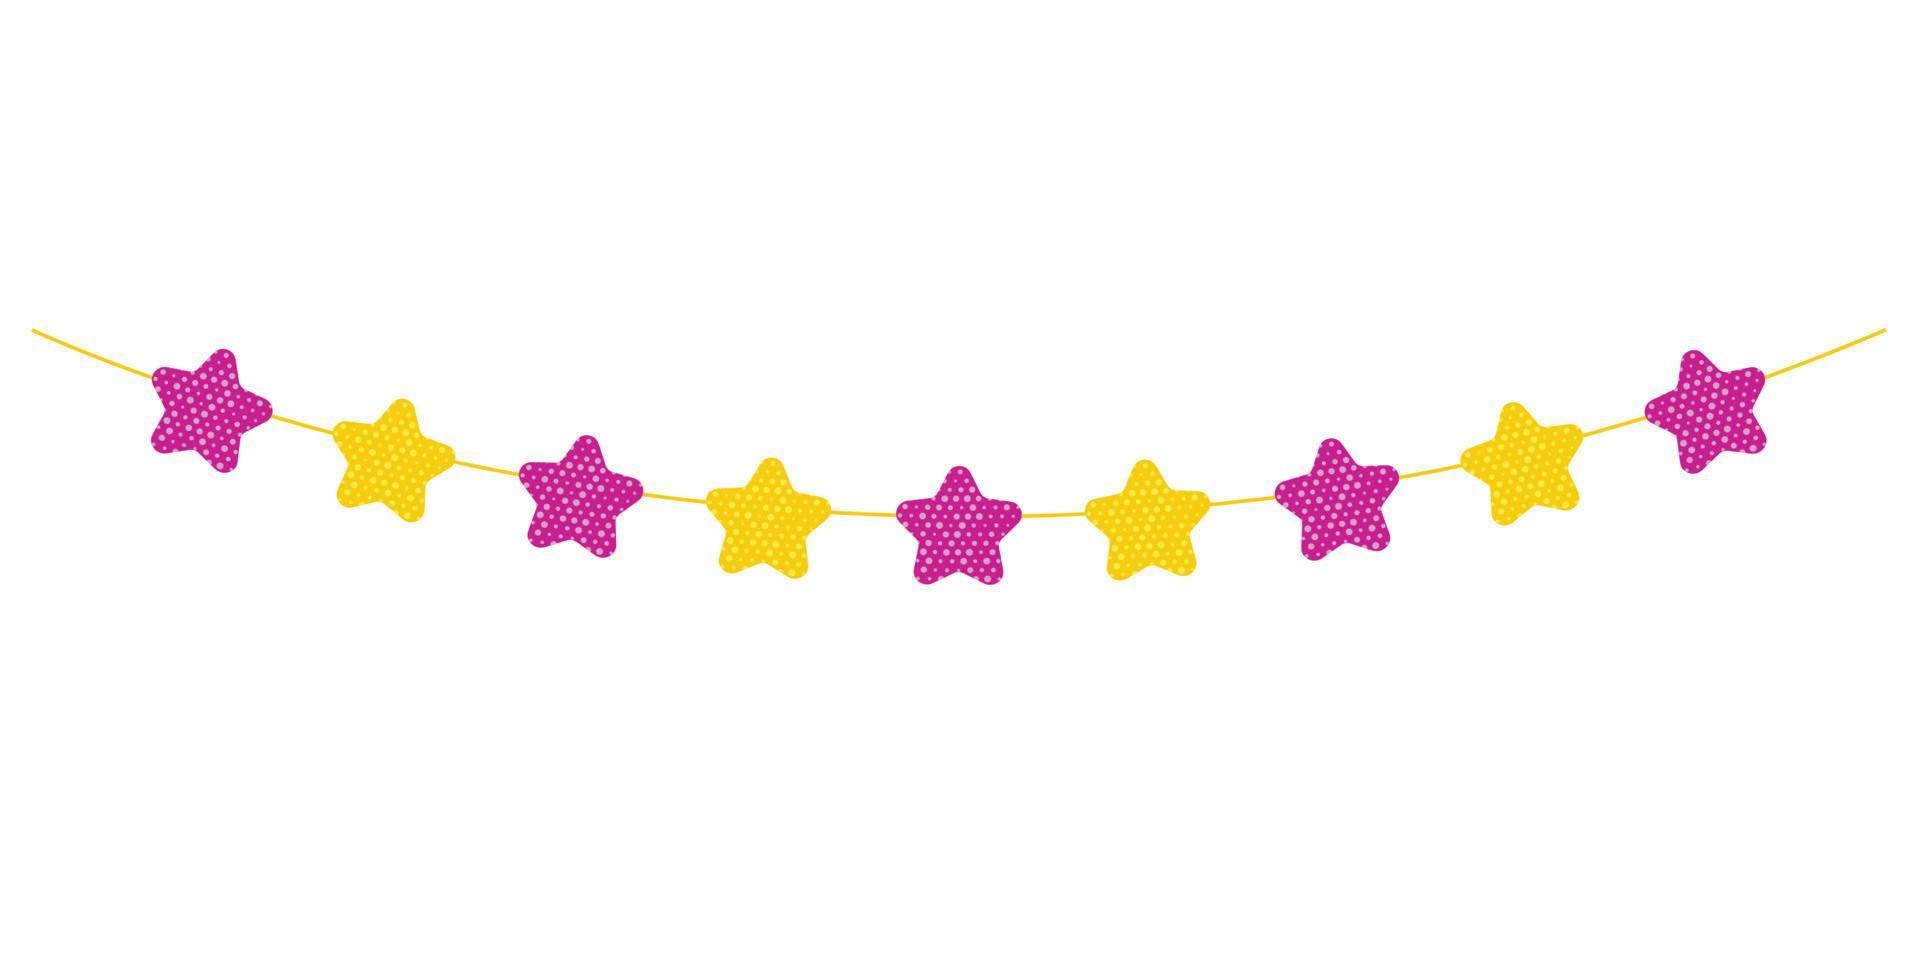 A garland of pink and yellow stars. Thread with ornaments. A holiday attribute. Vector